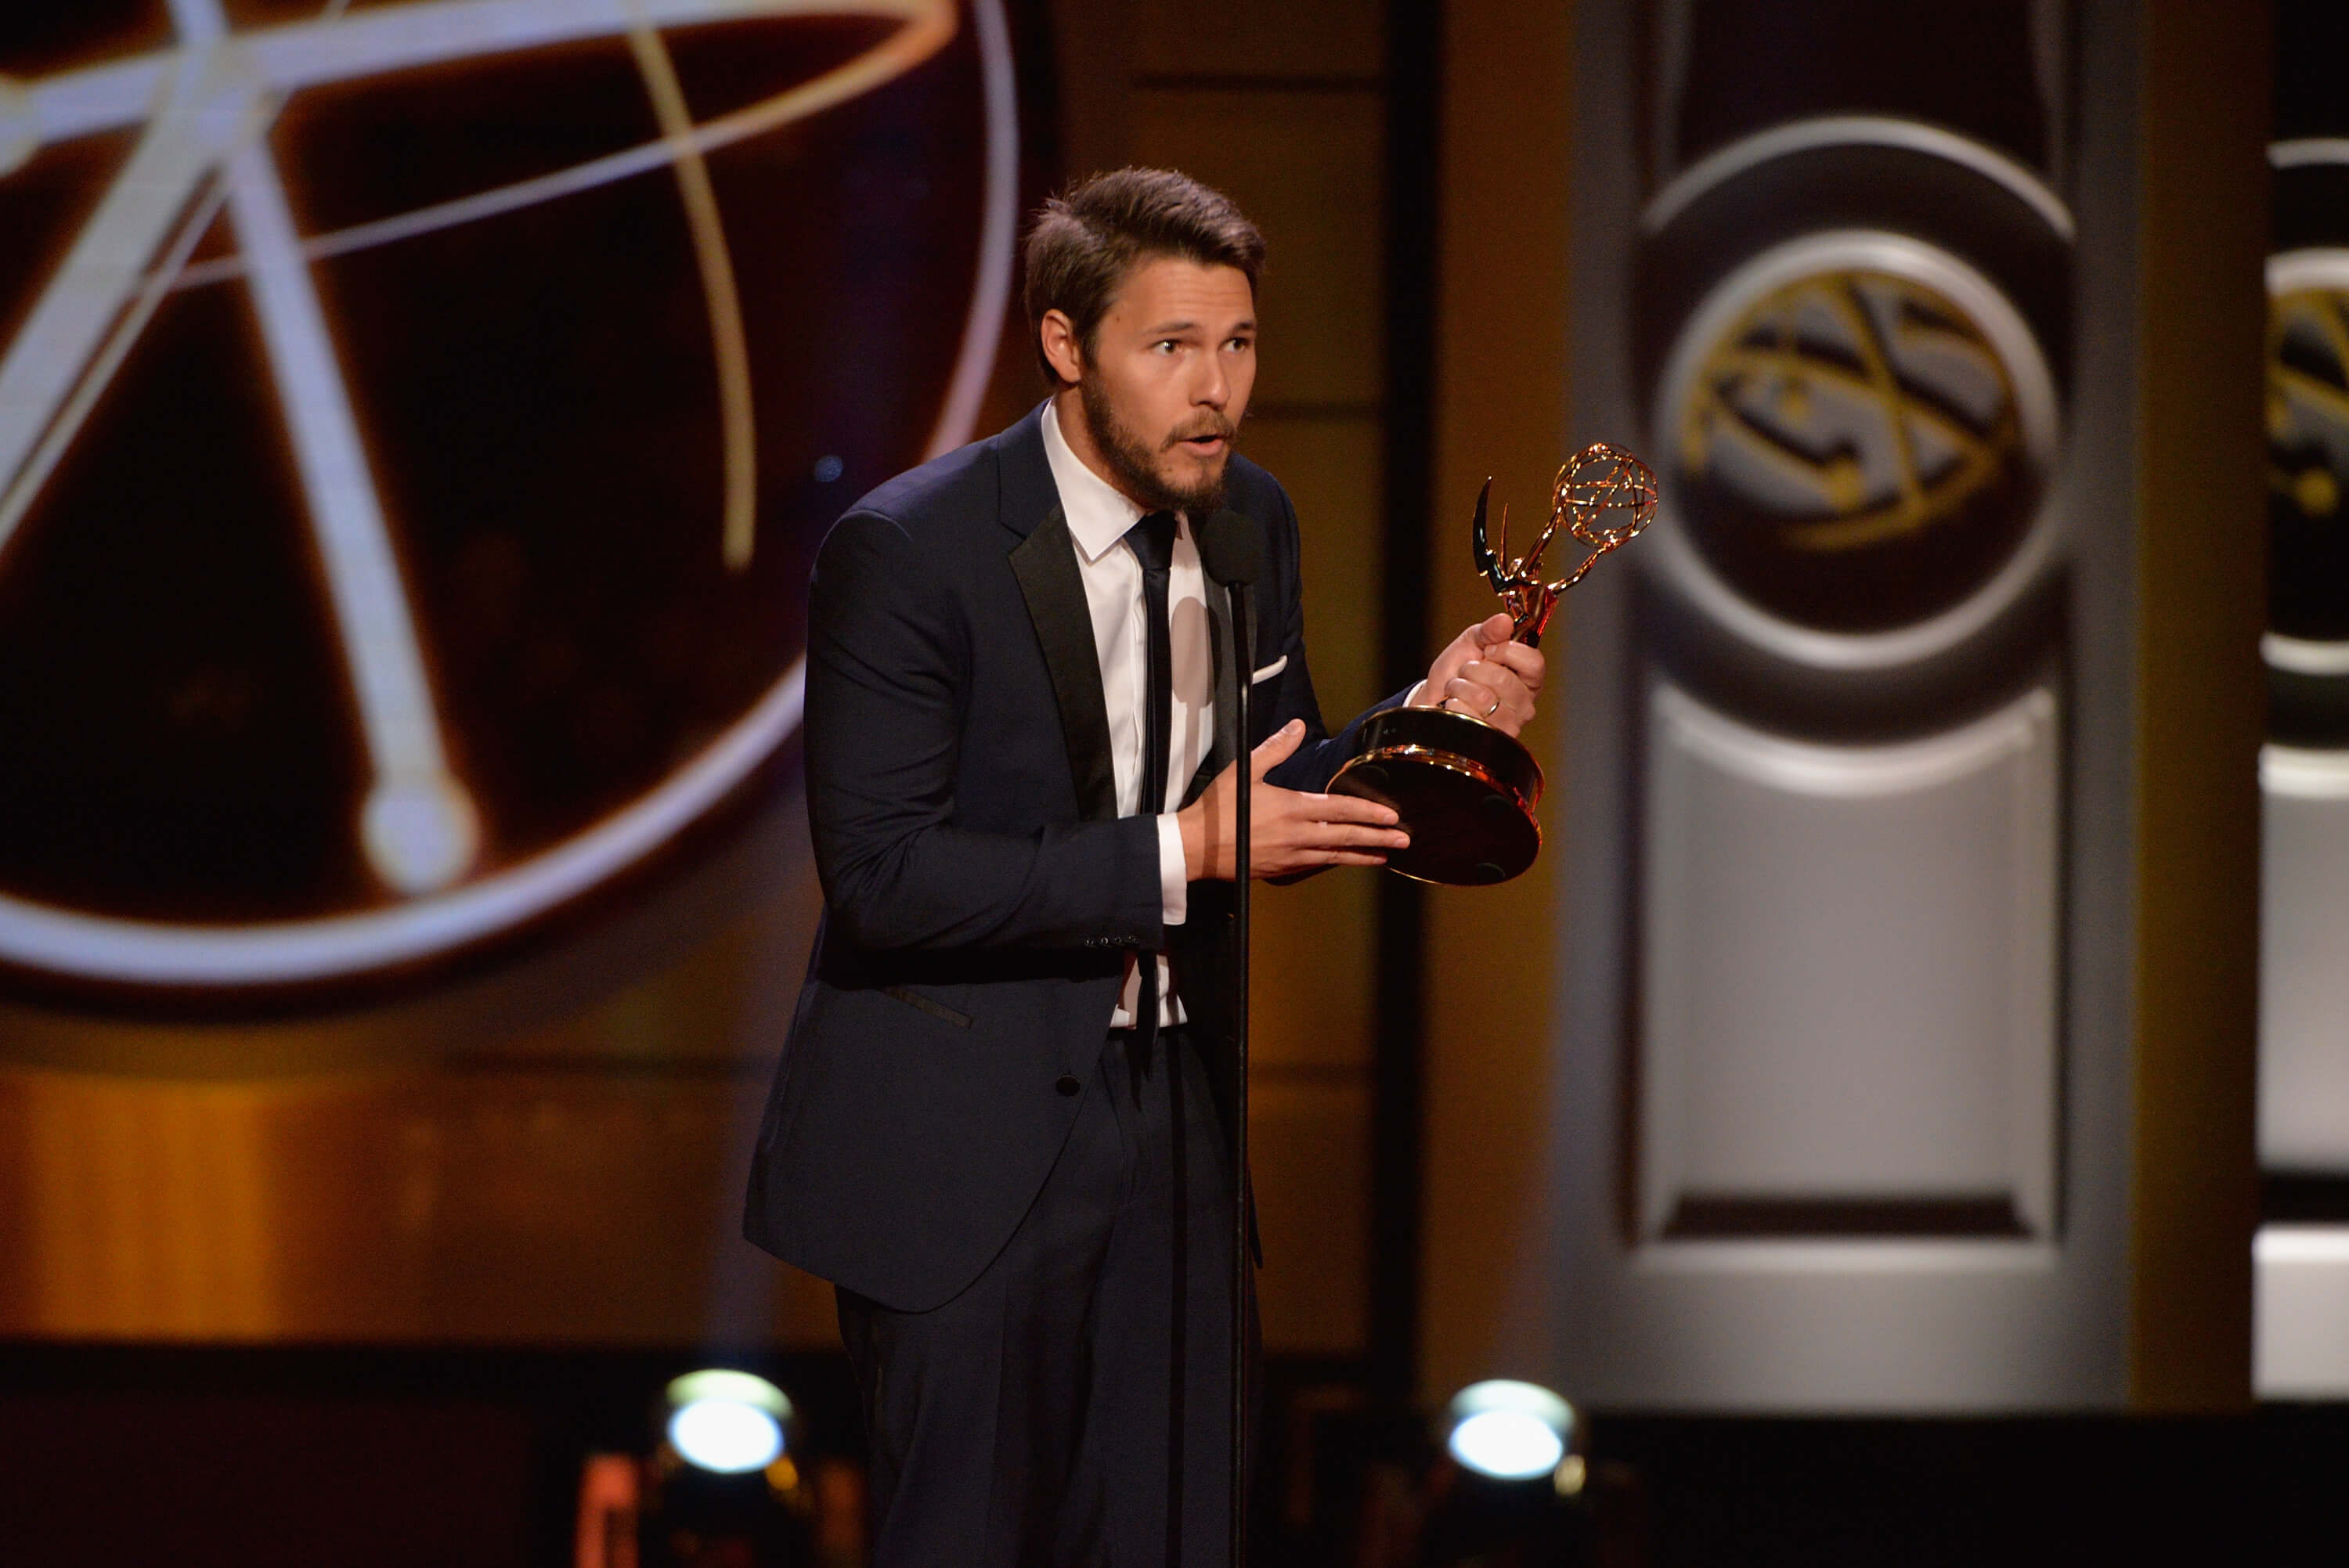 'The Bold and the Beautiful' star Scott Clifton dressed in a tuxedo; giving an acceptance speech after his Daytime Emmy win.